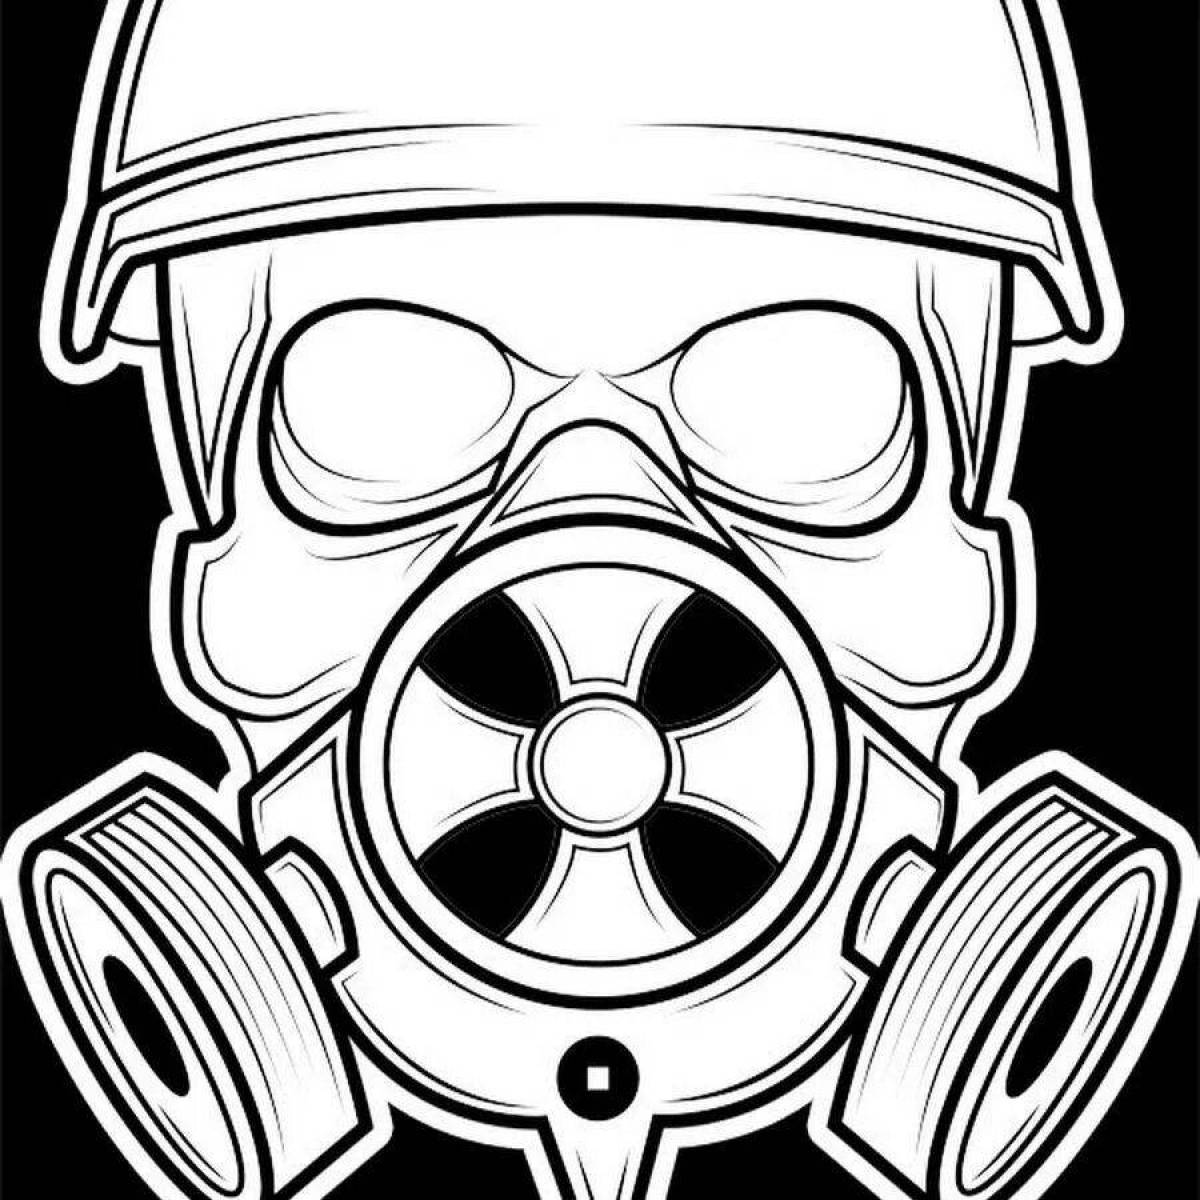 Cute mask coloring page